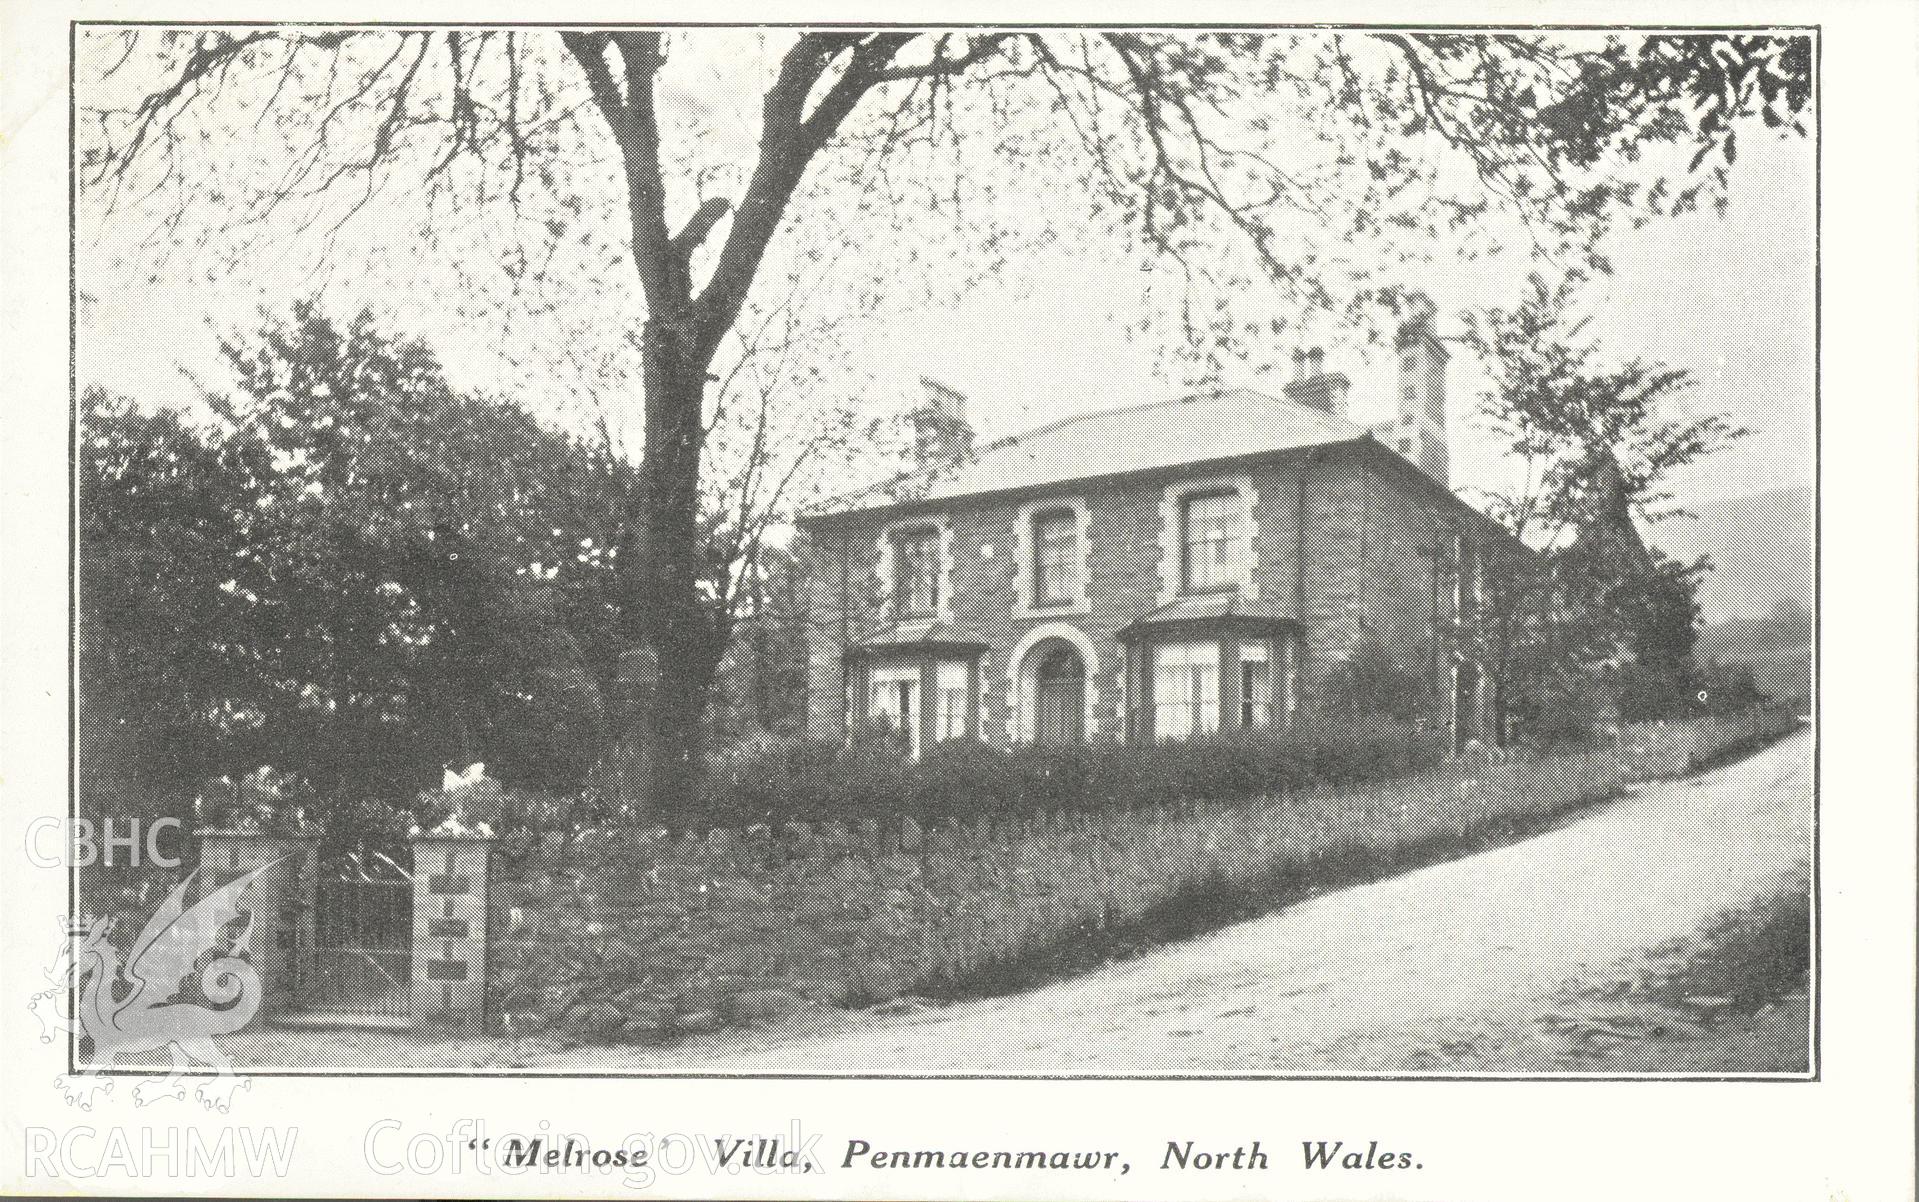 Digitised postcard image of Melrose Villa, Penmaenmawr. Produced by Parks and Gardens Data Services, from an original item in the Peter Davis Collection at Parks and Gardens UK. We hold only web-resolution images of this collection, suitable for viewing on screen and for research purposes only. We do not hold the original images, or publication quality scans.